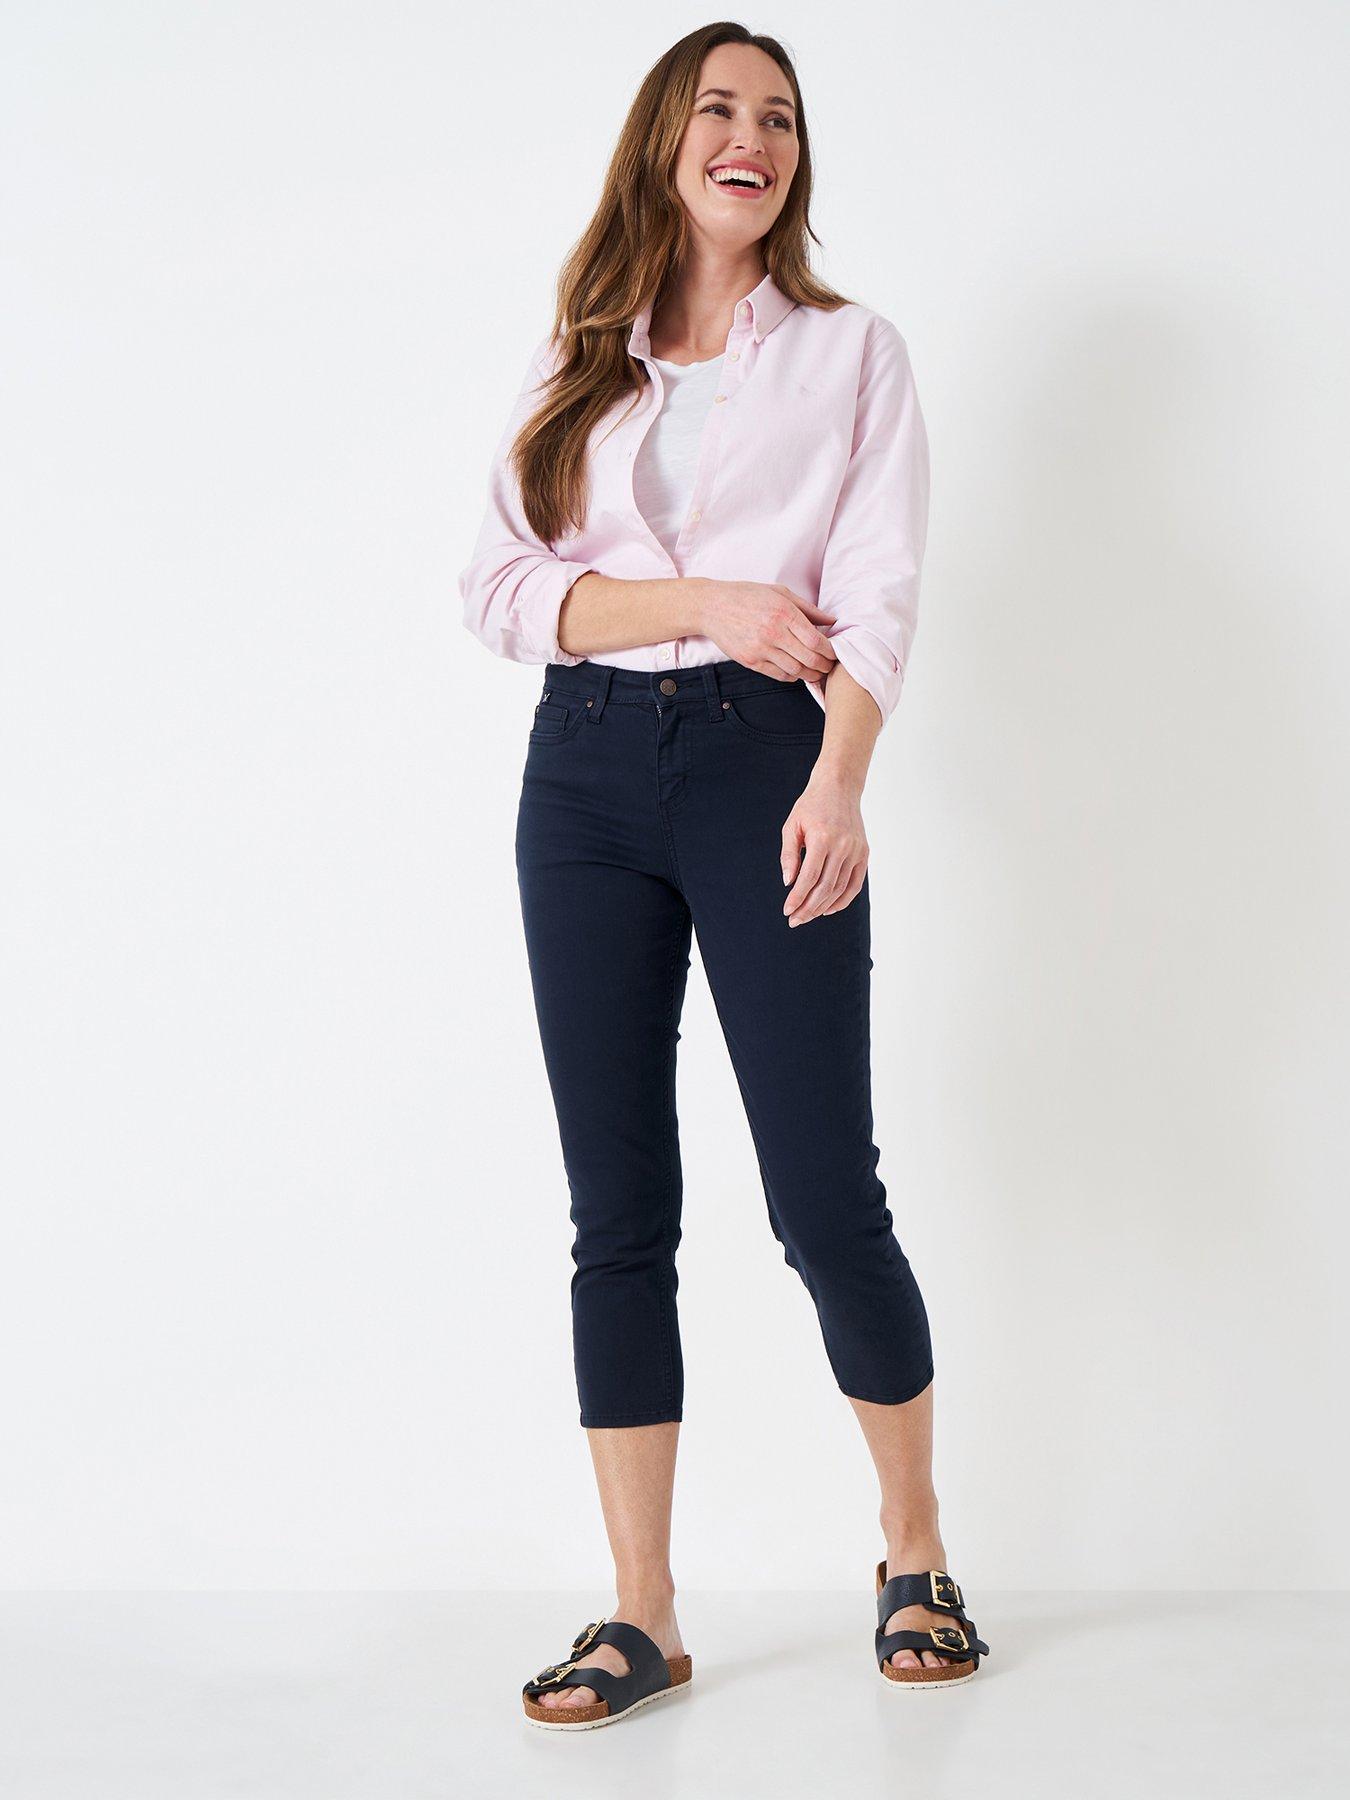 CREW CLOTHING Capri Trousers in Navy Blue